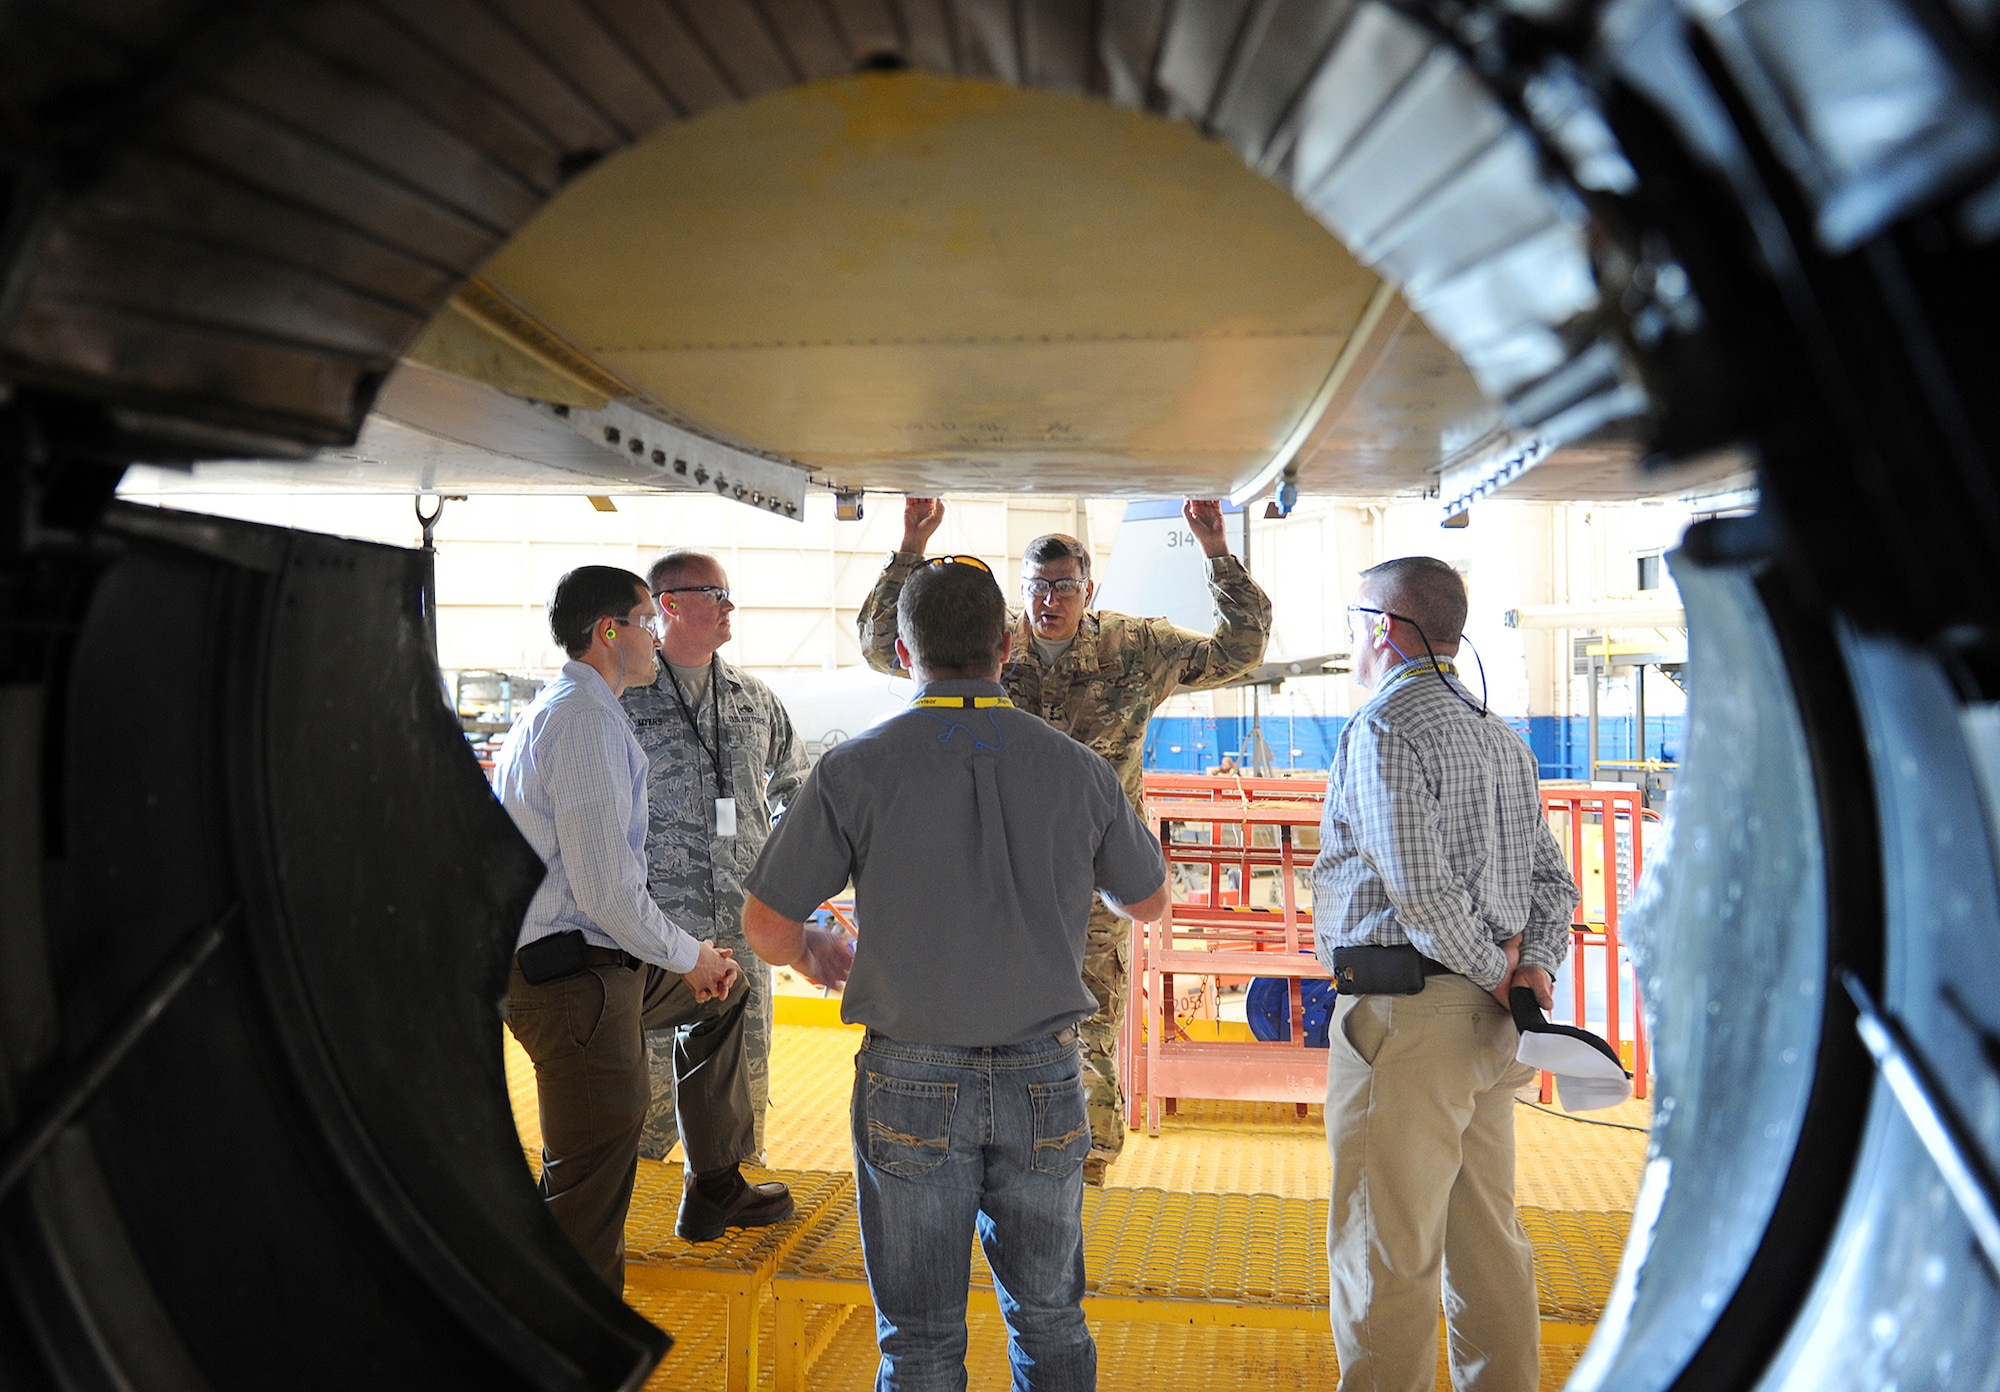 Lt. Gen. Bradley Heithold, Air Force Special Operations Command commander, takes a moment to talk with members of the C-130 AFSOC Acceleration Flight during his tour of the production lines at Robins Air Force Base. During the tour, Heithold was briefed on the programmed depot maintenance plan, lessons learned, the production gate flow process and the status of current aircraft on station. (U.S. Air Force photo by Tommie Horton)